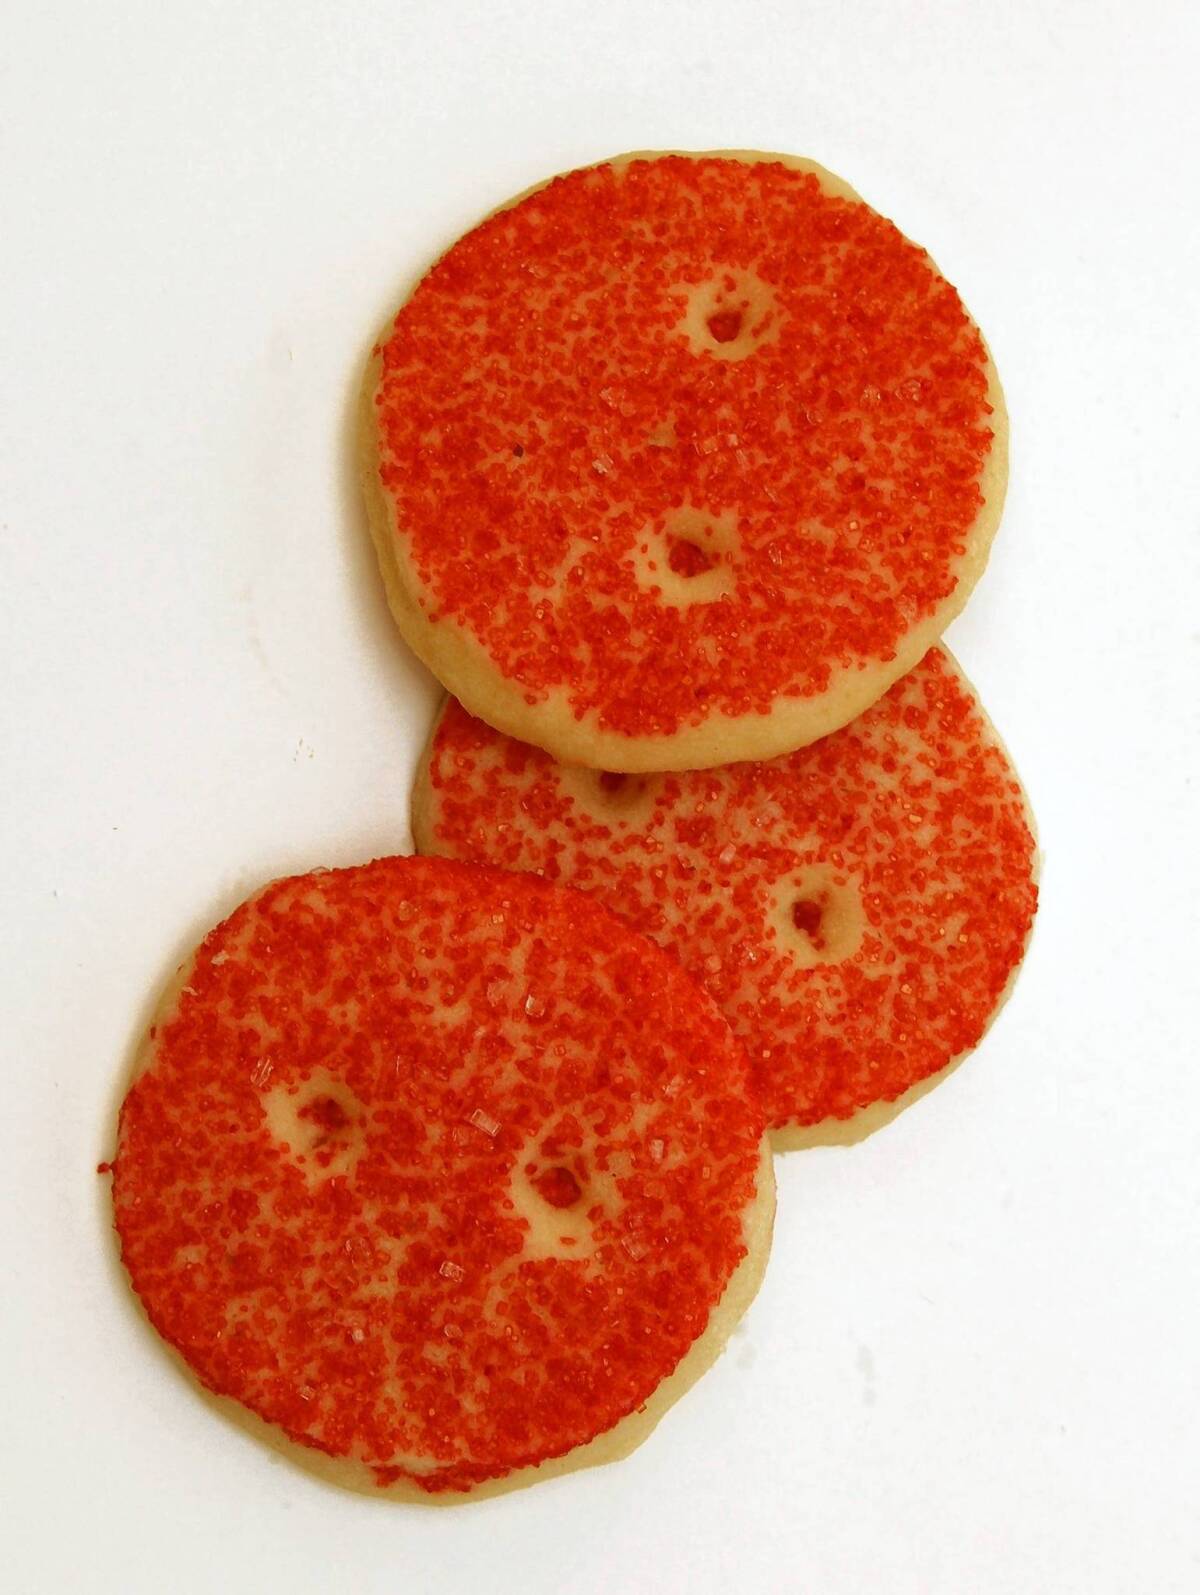 Santa's Coat Buttons are finalists from the 2012 contest.